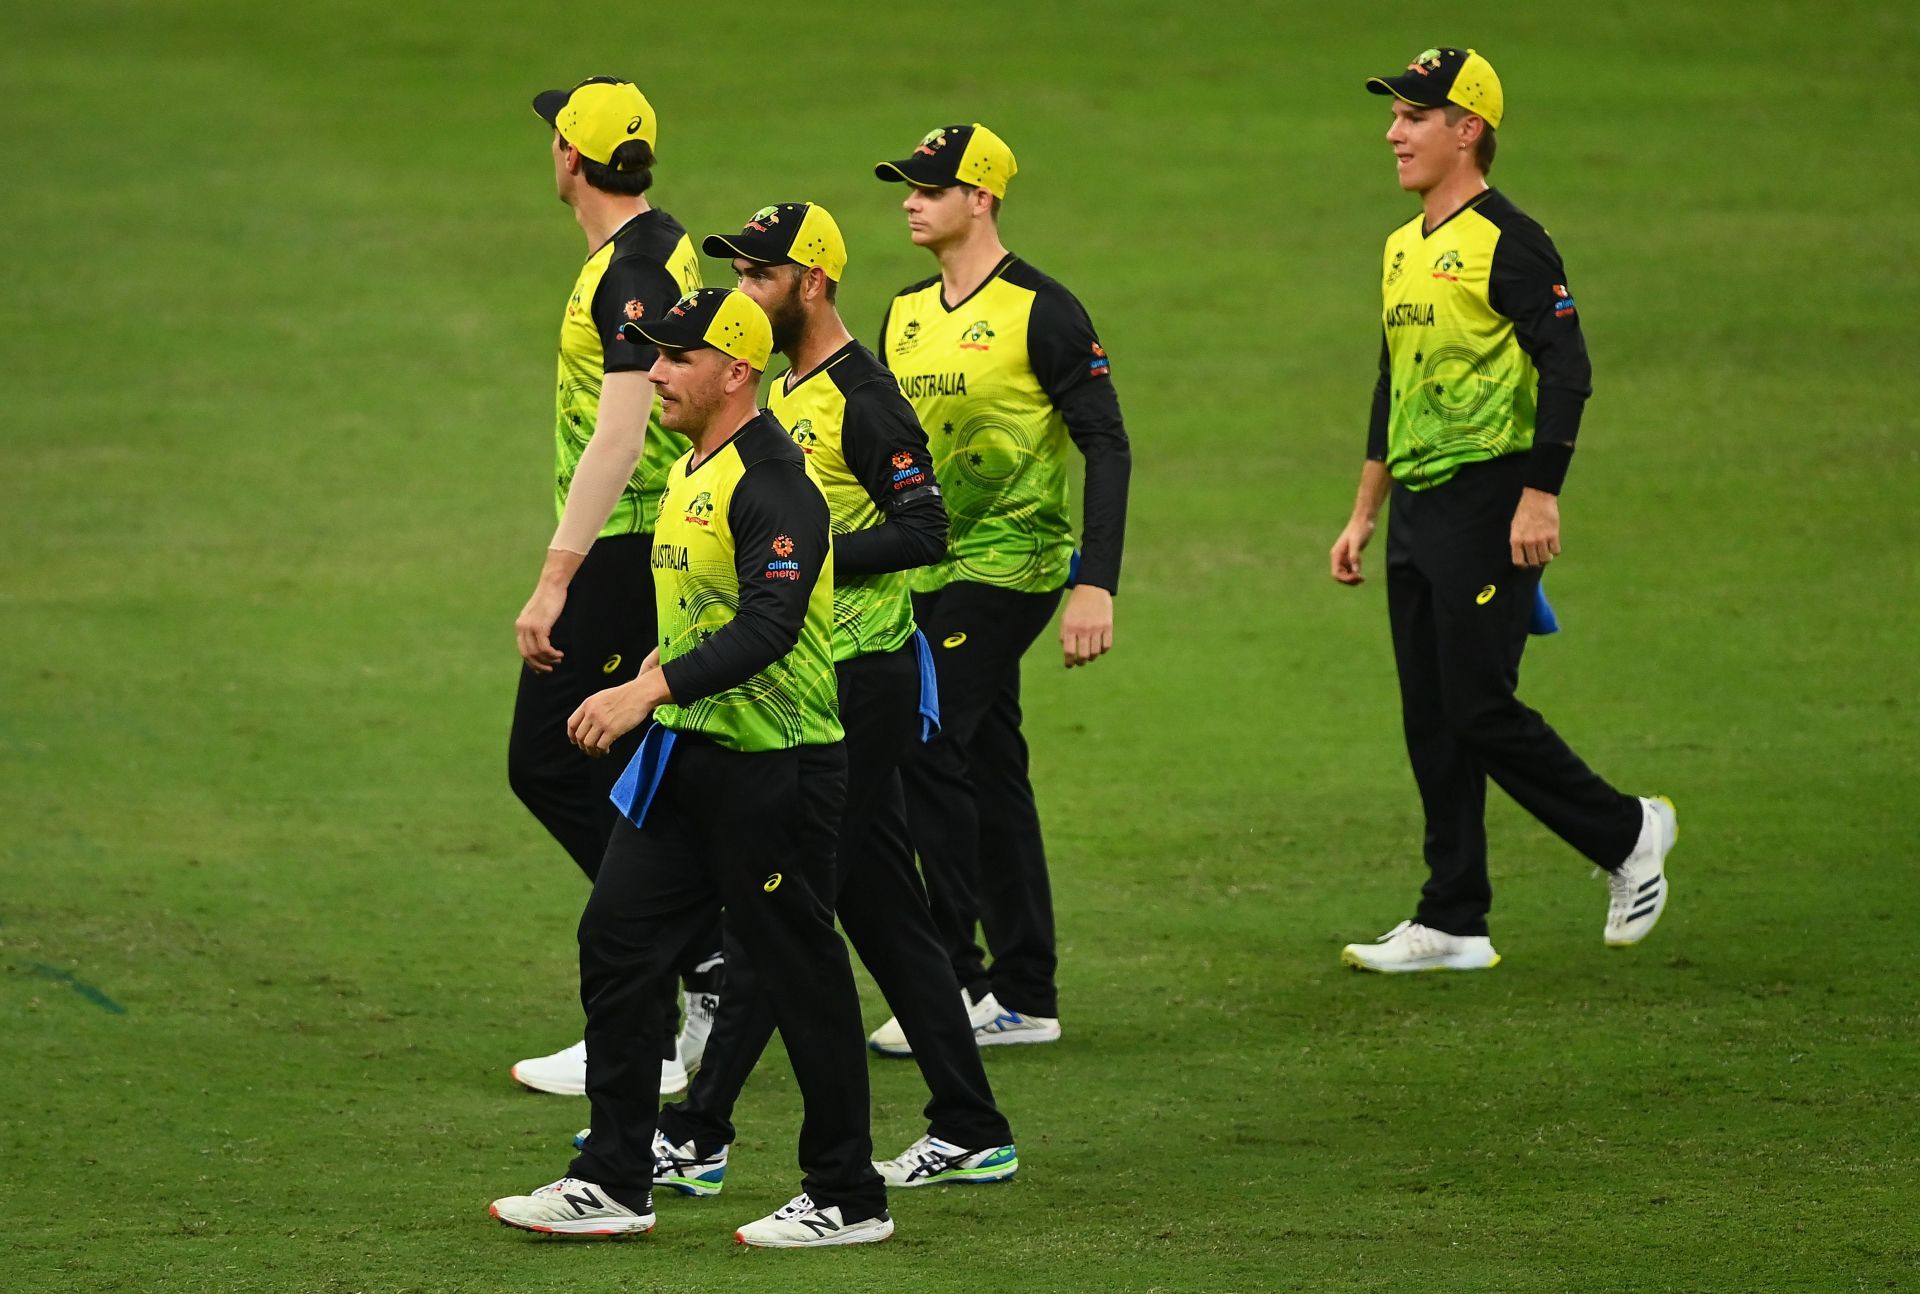 Australia suffered a massive defeat at the hand of England in T20 World Cup 2021